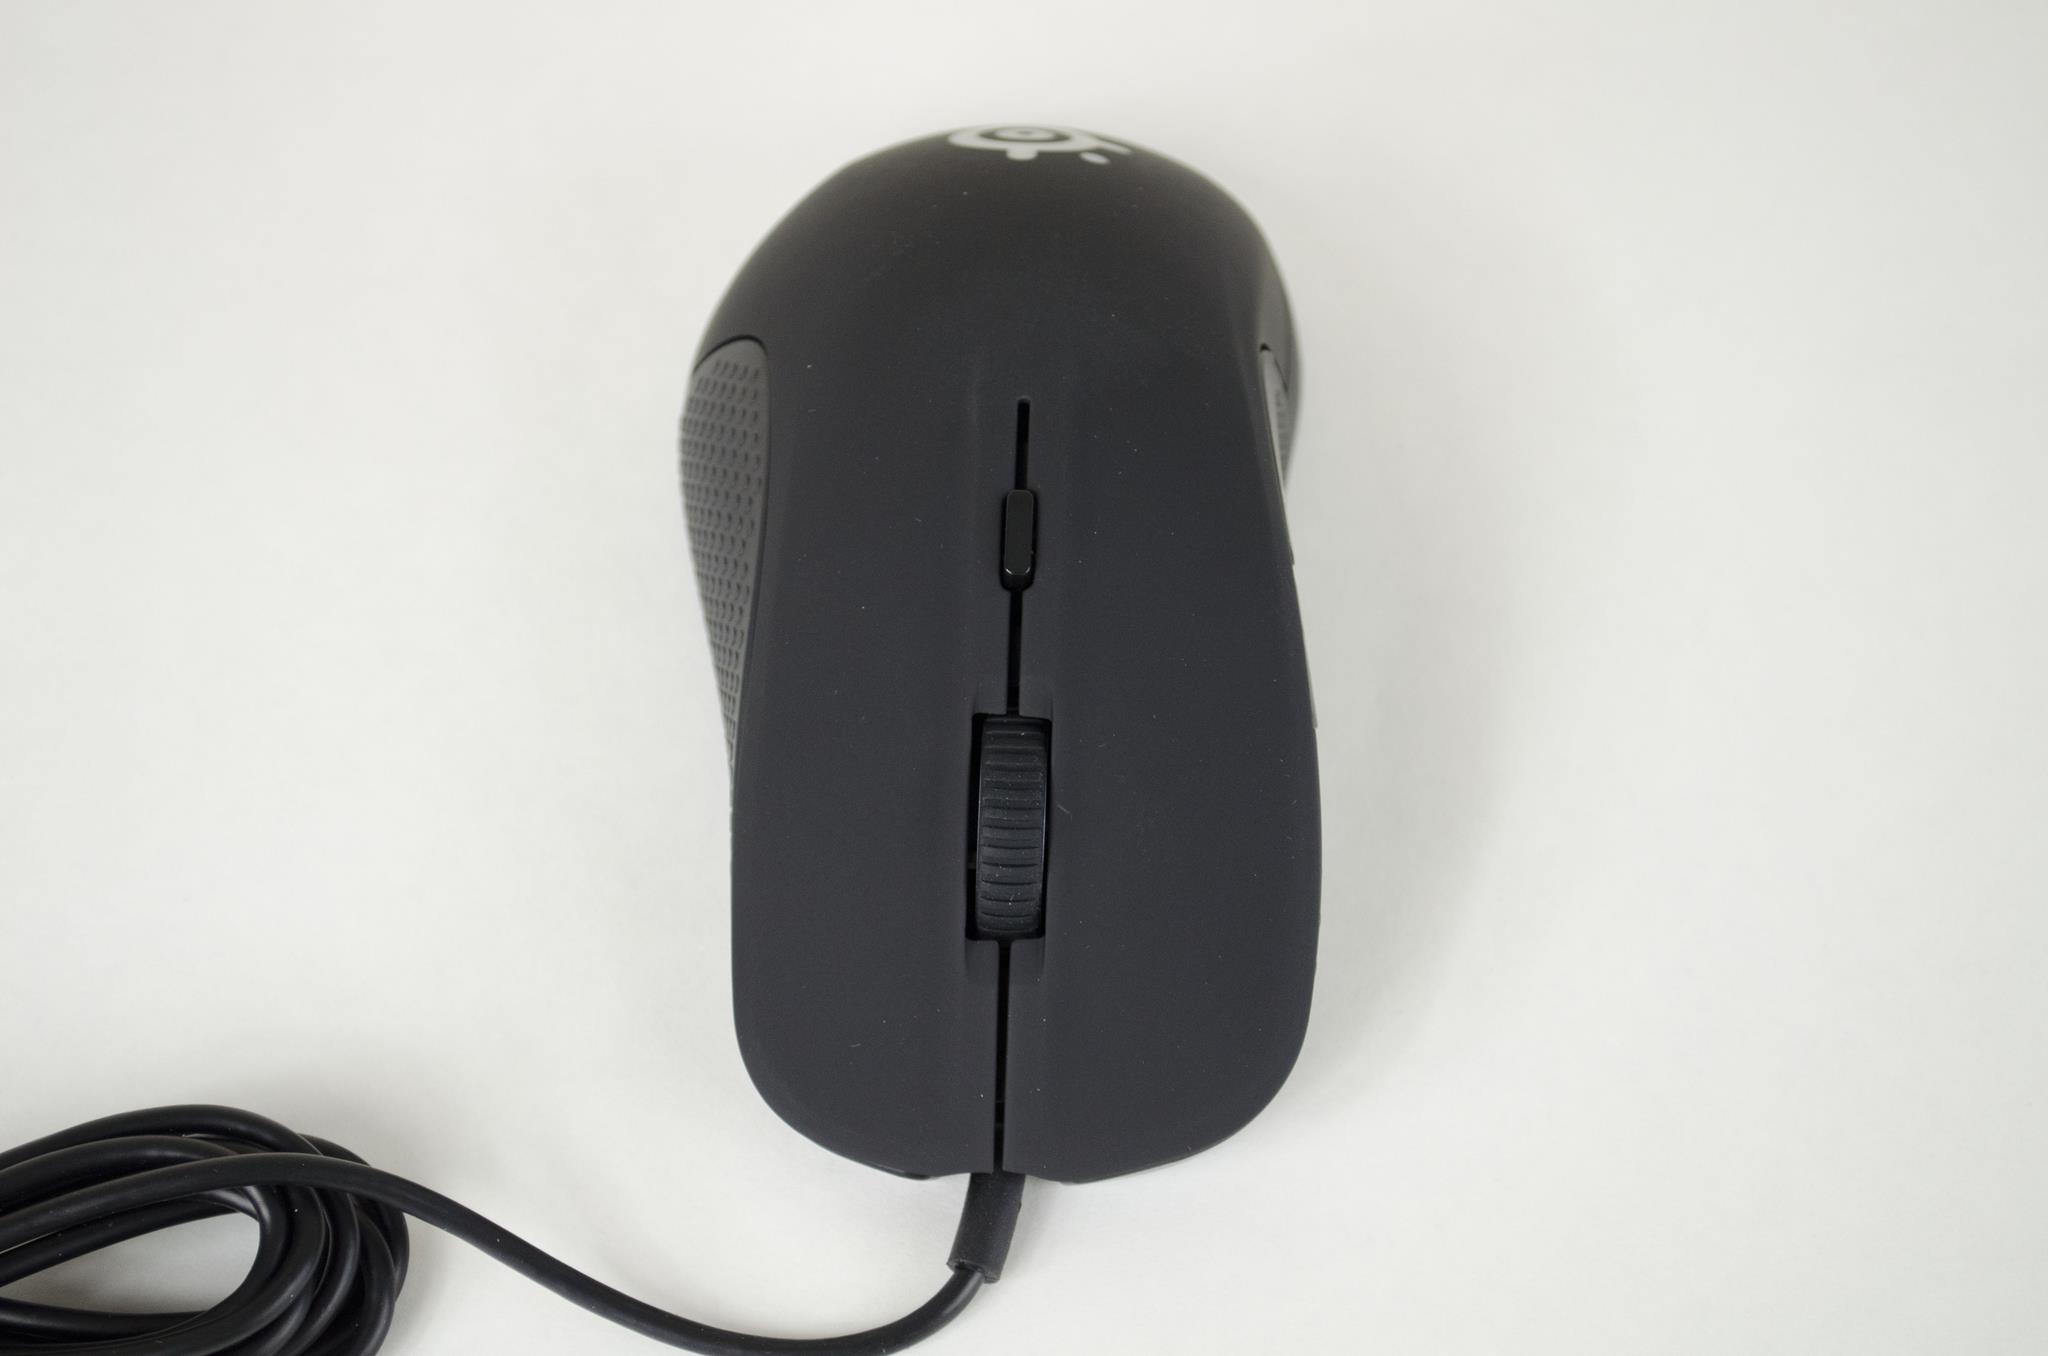 steelseries rival 300 gaming mouse _5